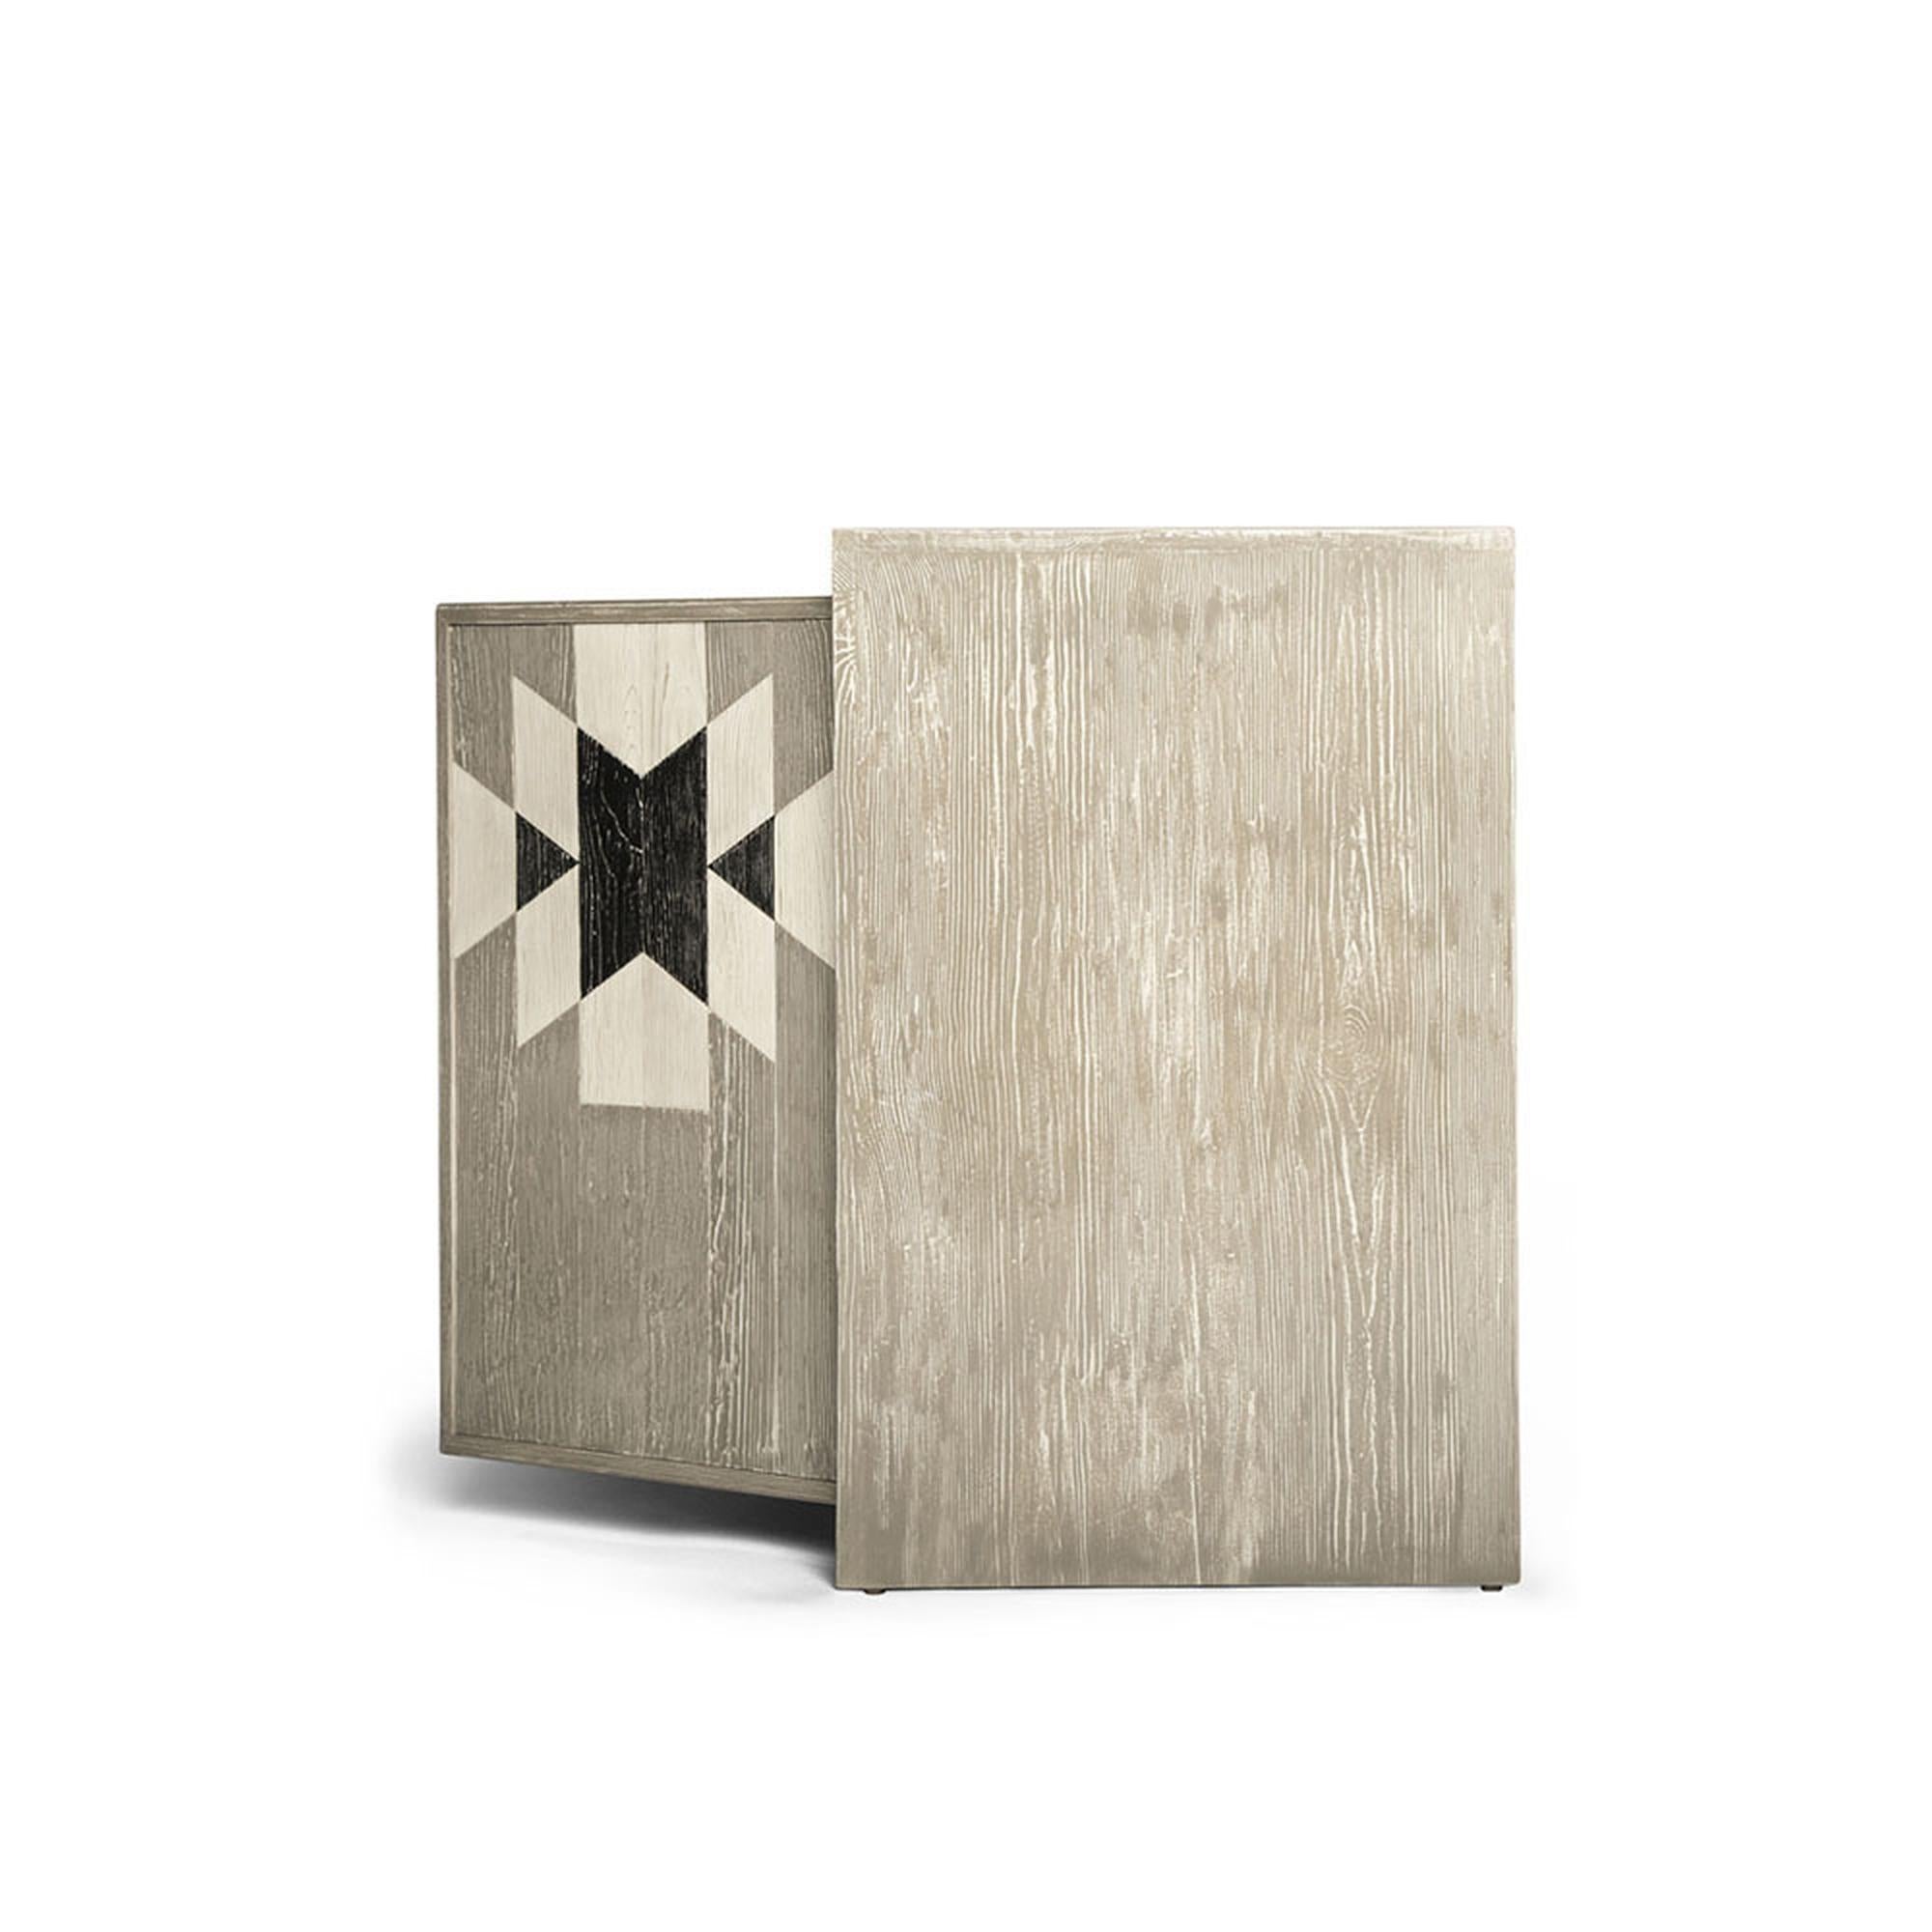 Mexican Capistrano Credenza in Rustic Wood W/ Geometric Pattern by Innova Luxuxy Group For Sale